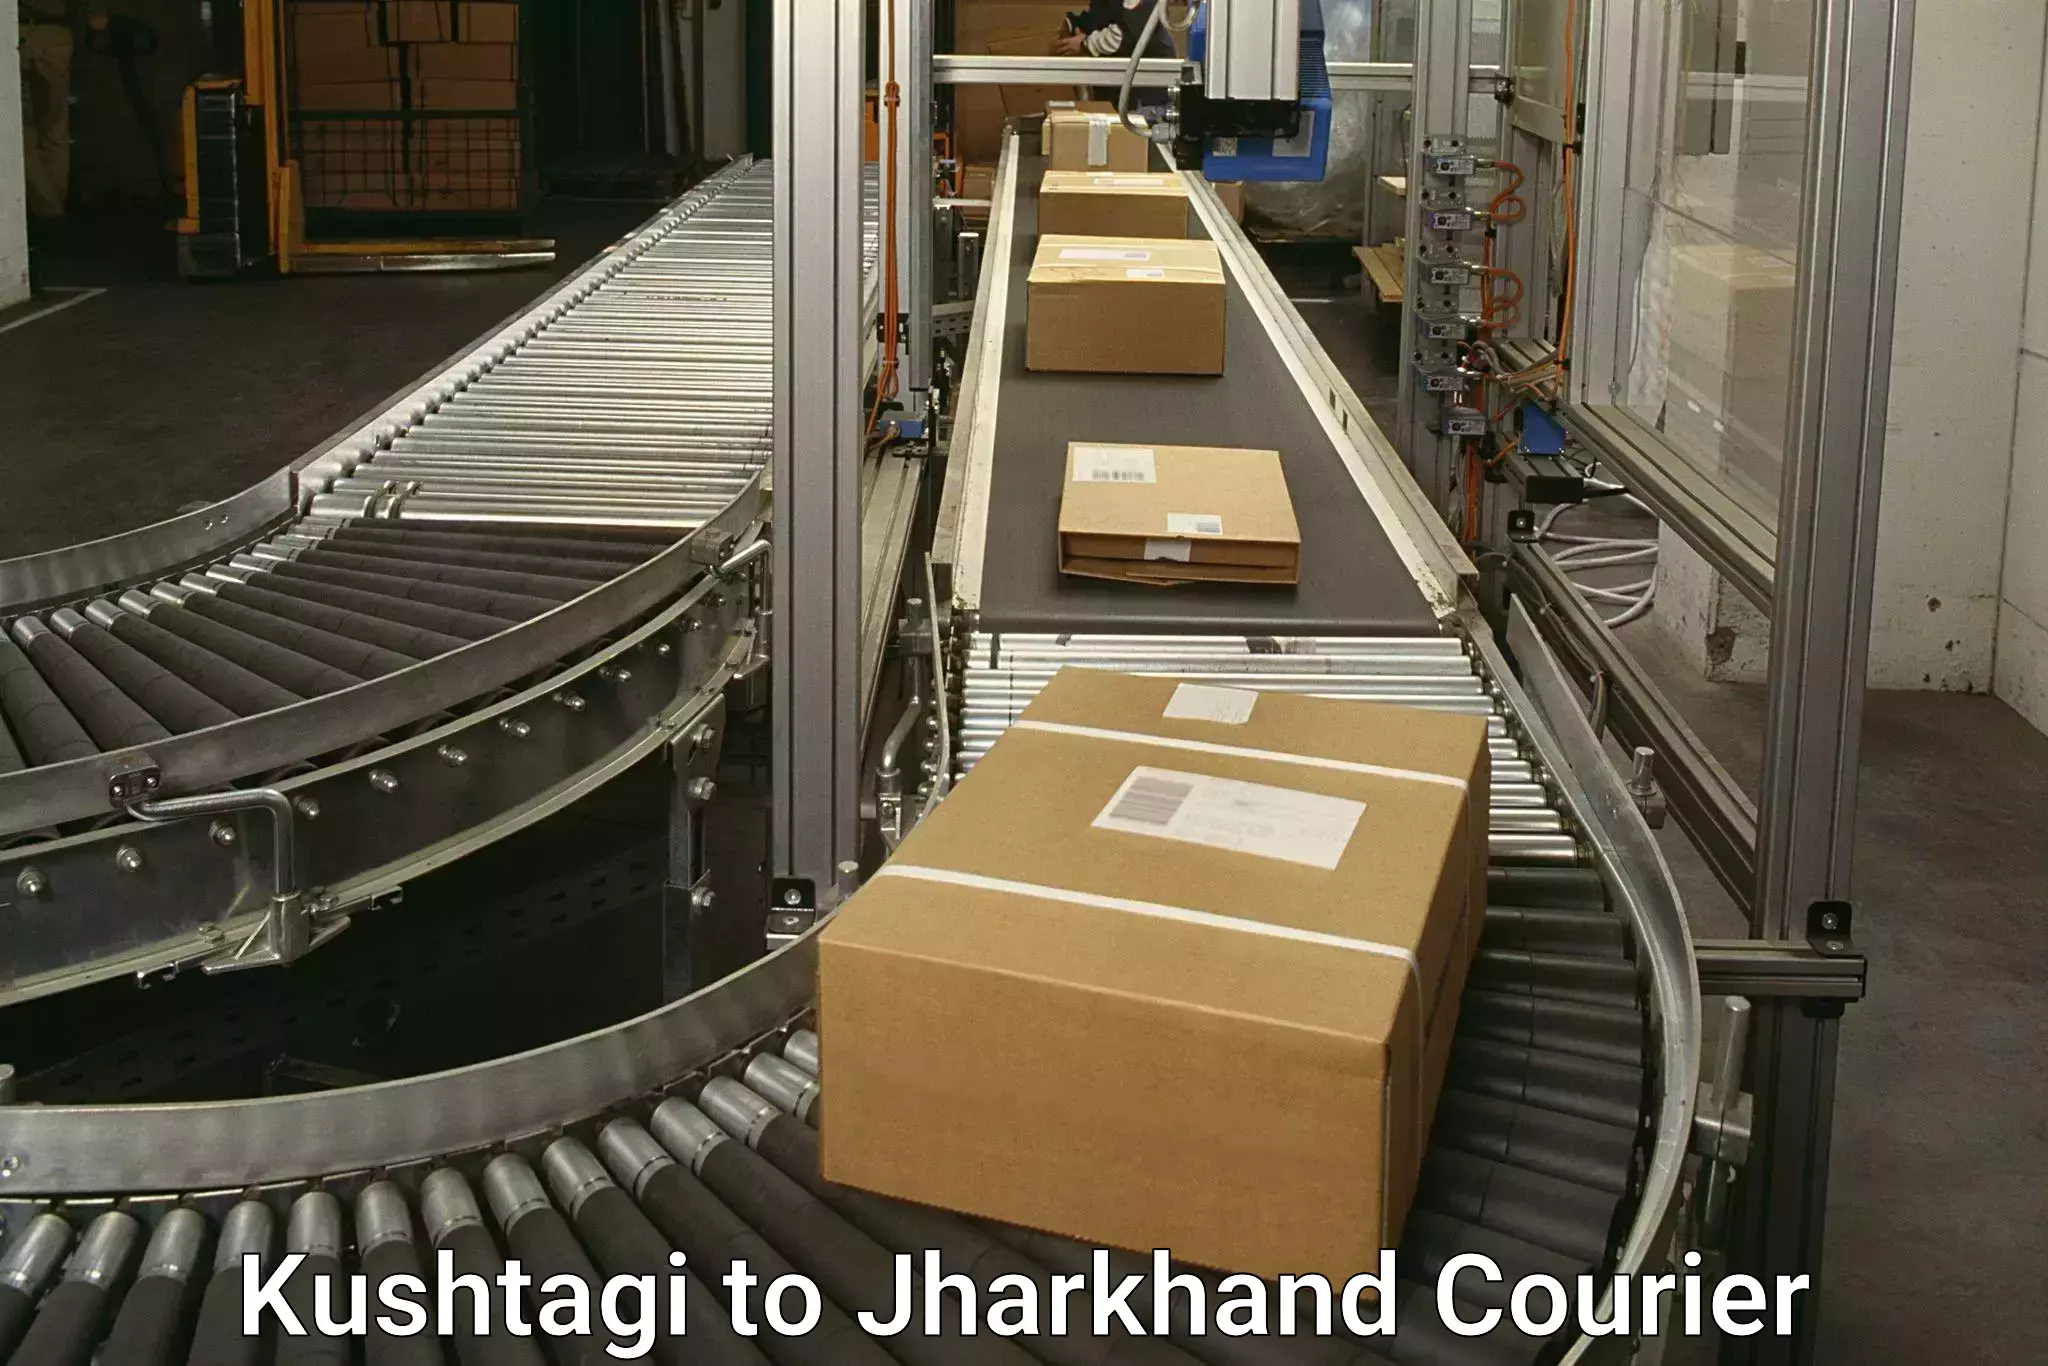 State-of-the-art courier technology Kushtagi to Jharkhand